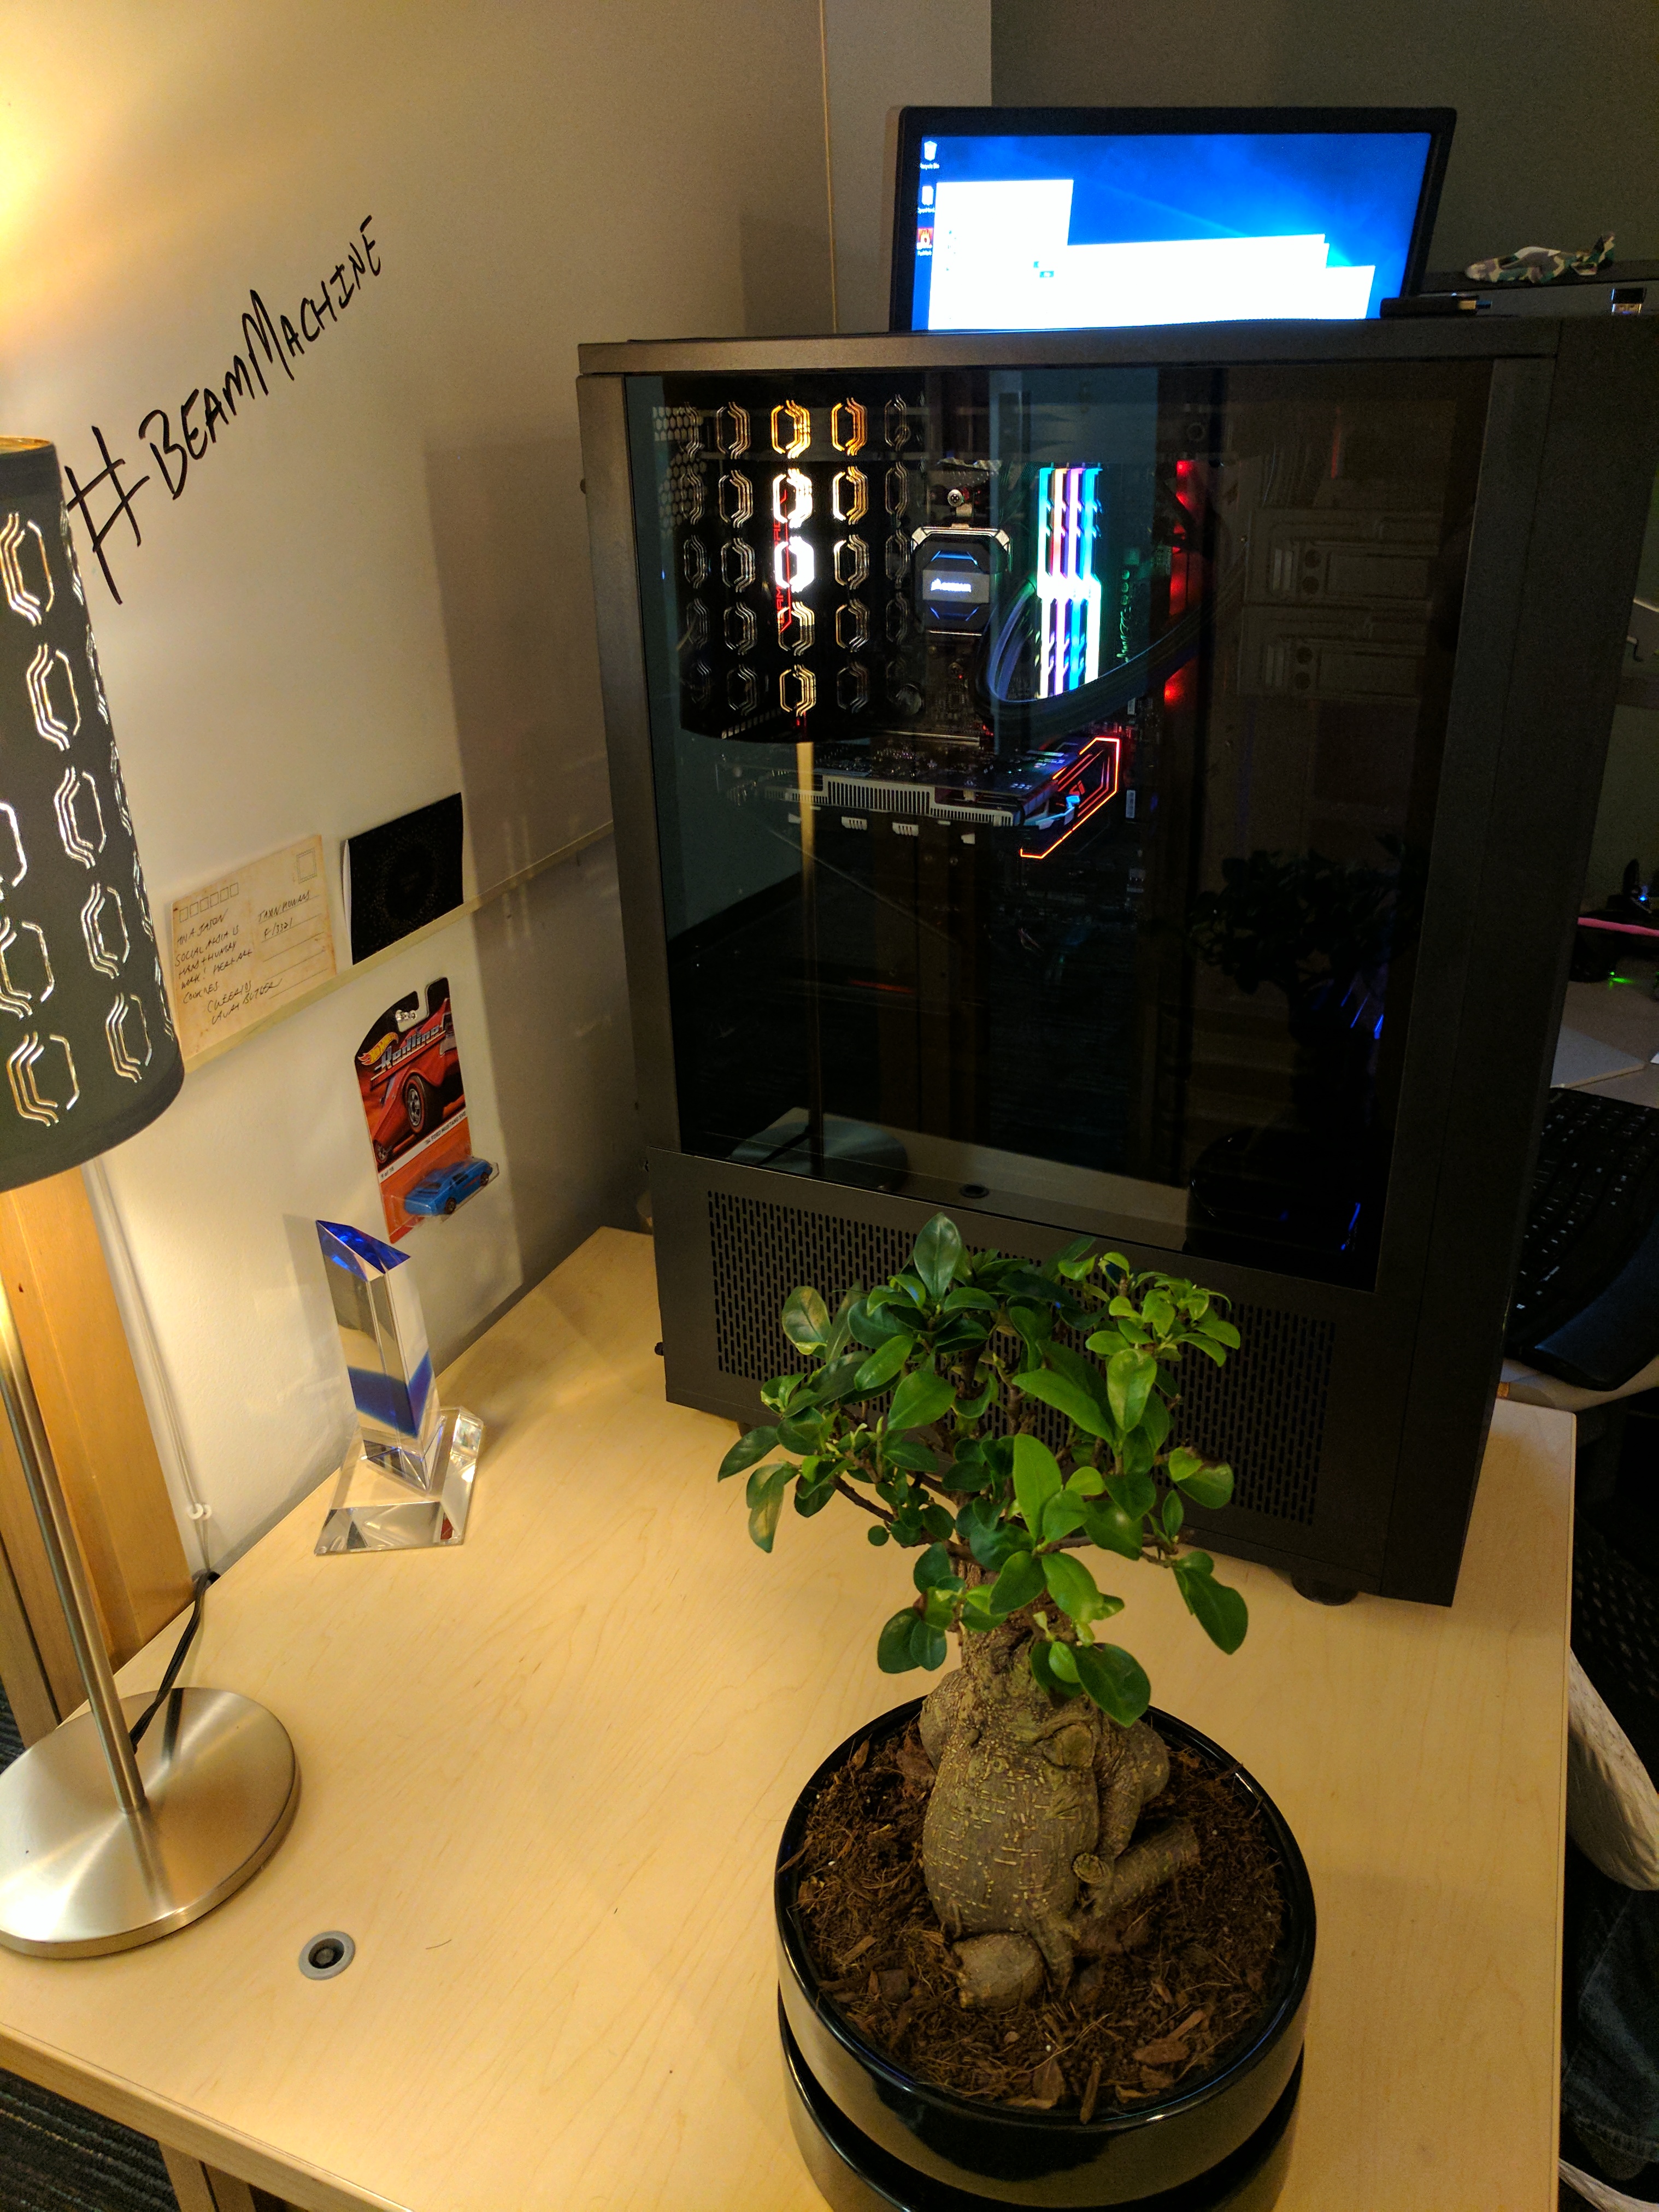 The #BeamMachine is alive and well. And in the words of the late Bob Ross, “we’ll put a happy little tree right here…”